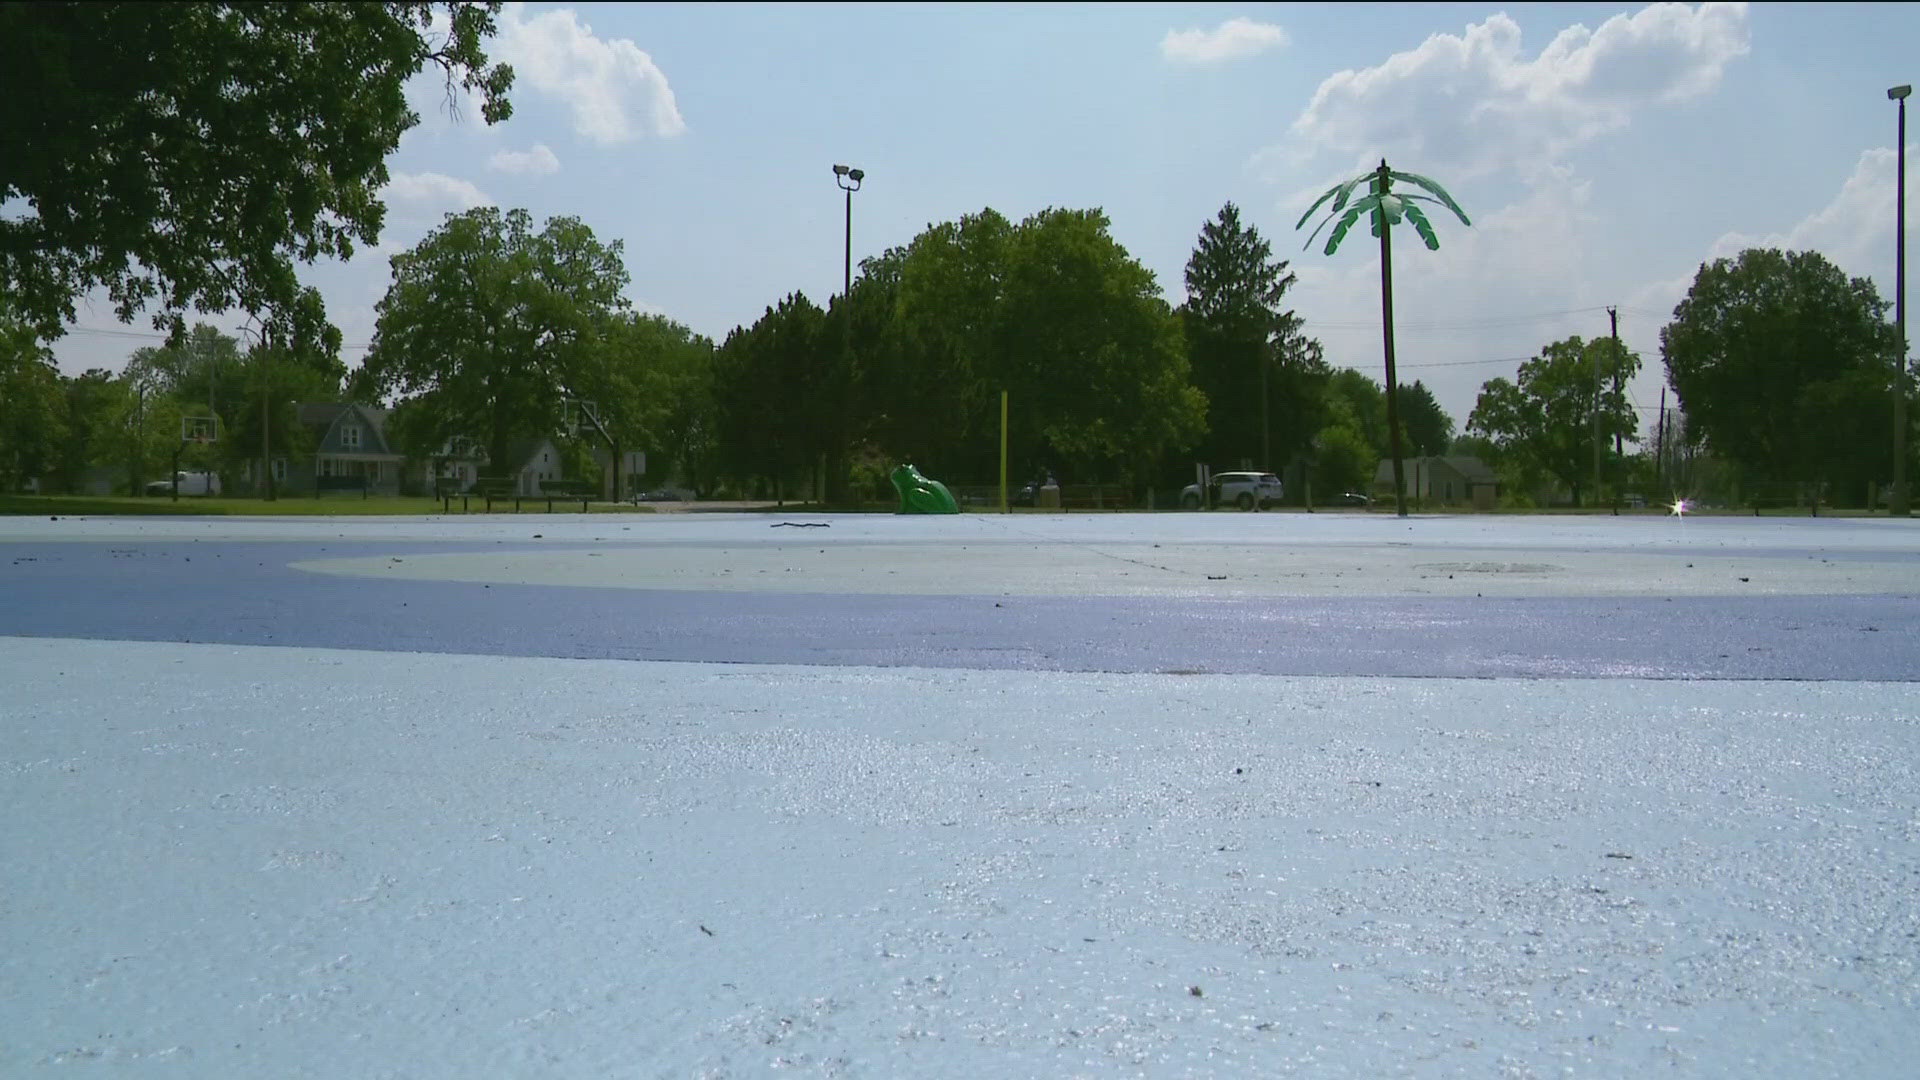 The Rev. H.V. Savage Park's splash pad on Nebraska Avenue remains closed because the city needs to meet new regulations, according to a city spokesperson.